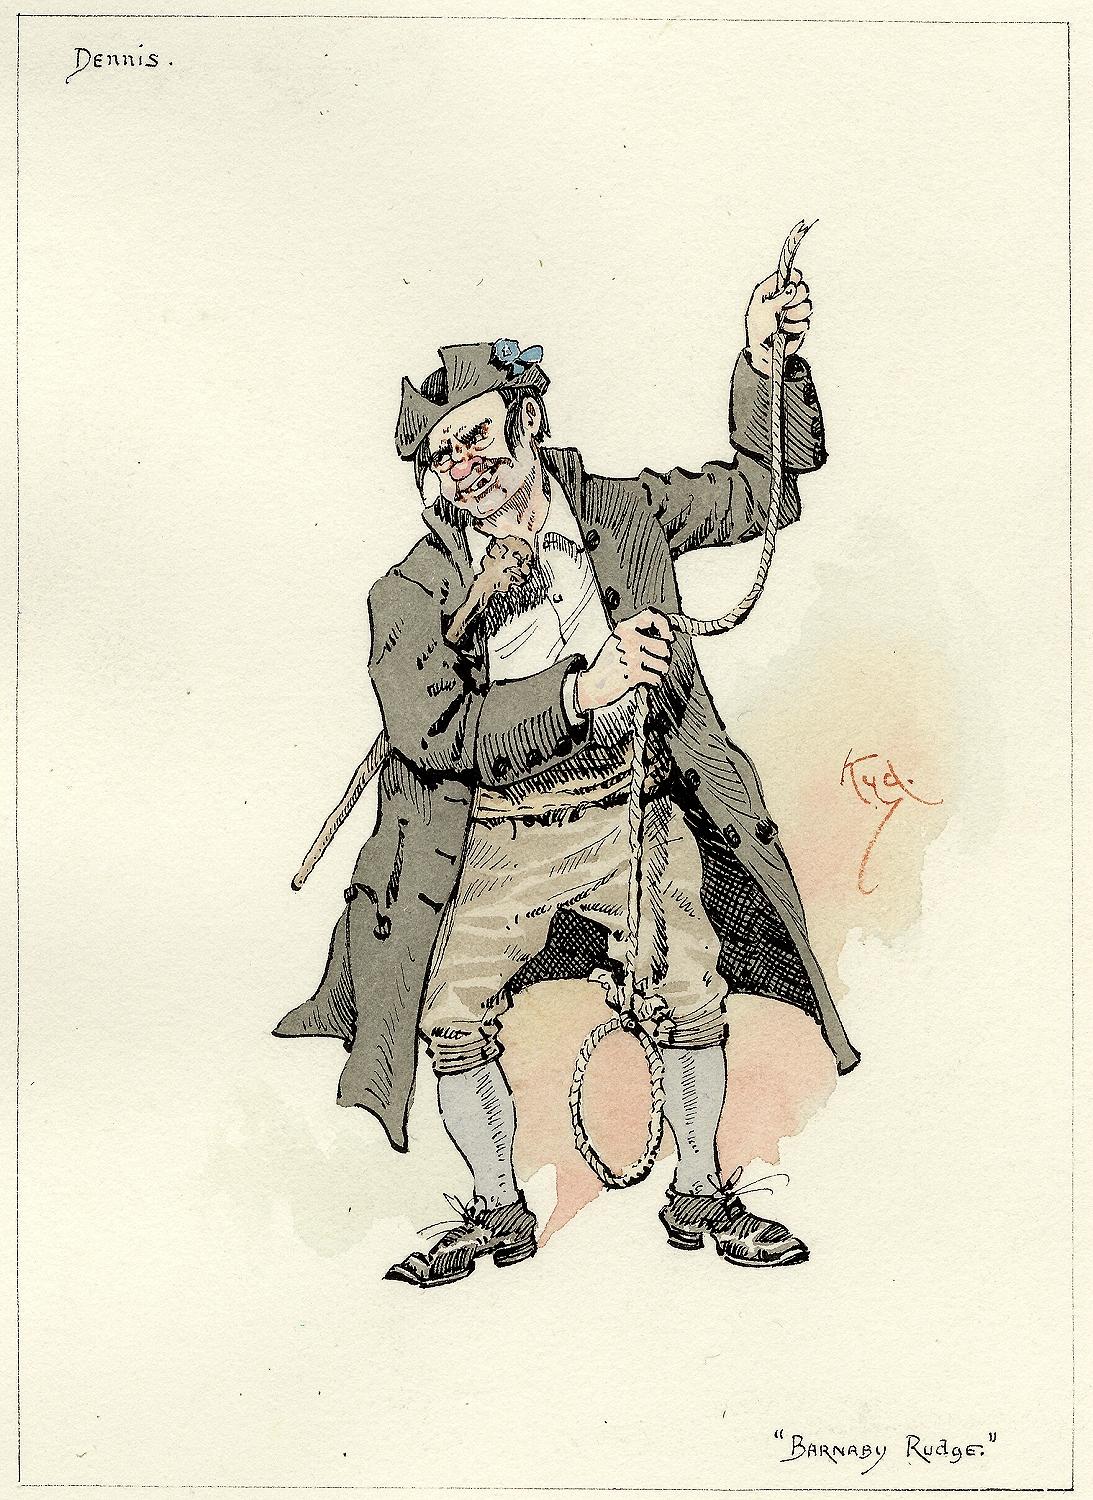 AUTHOR: CLARKE, Joseph Clayton (KYD) (Charles Dickens). 

TITLE: Dennis (from Barnaby Rudge)

PUBLISHER: England, [c. 1920]

DESCRIPTION: ORIGINAL INK AND WATERCOLOR SKETCH. 1 leaf, on paper, image 5-15/16